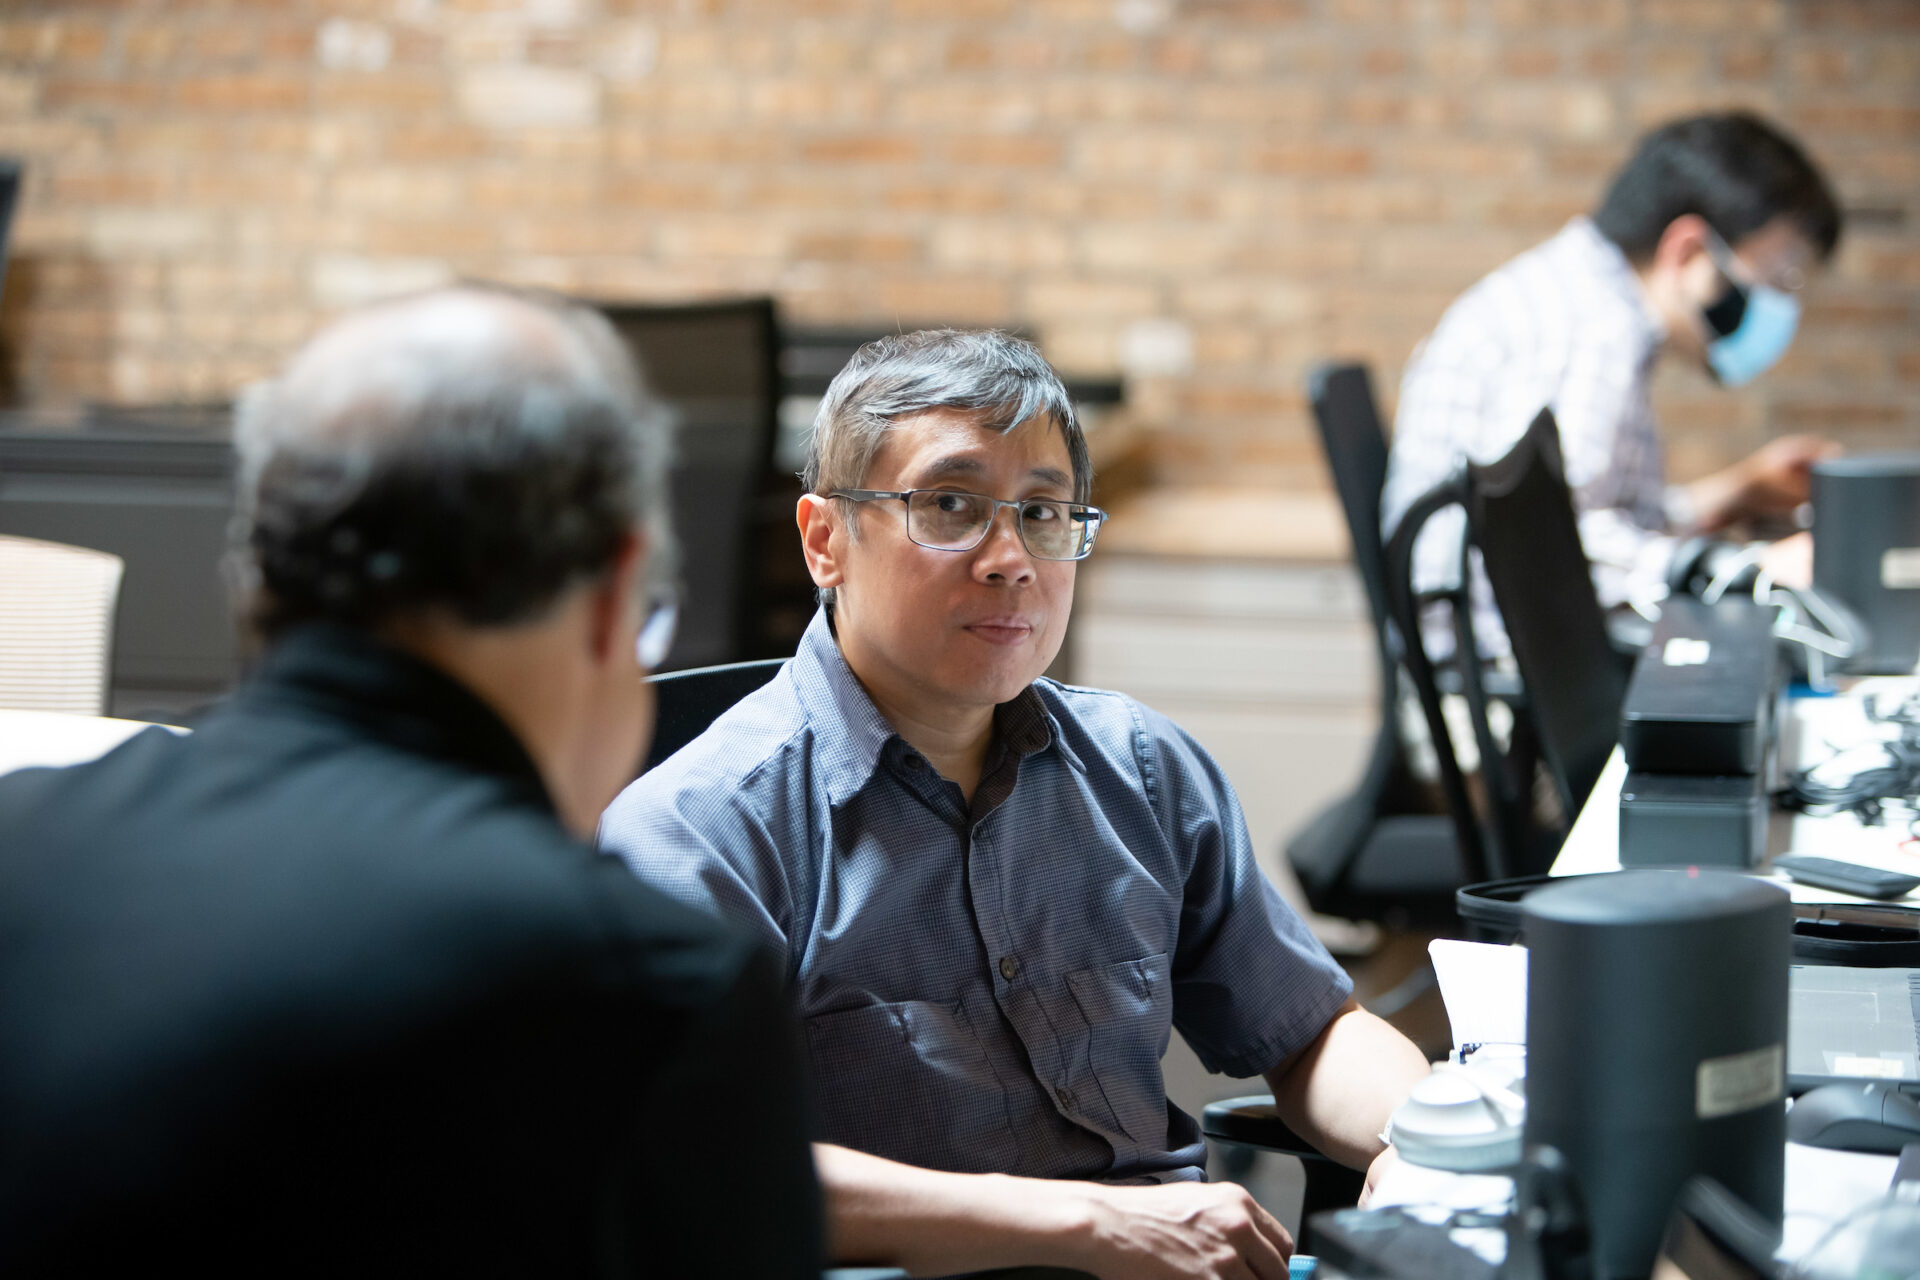 A male Aspiritech QA analyst in a blue-gray shirt and glasses looks toward a man in a black shirt in glasses.